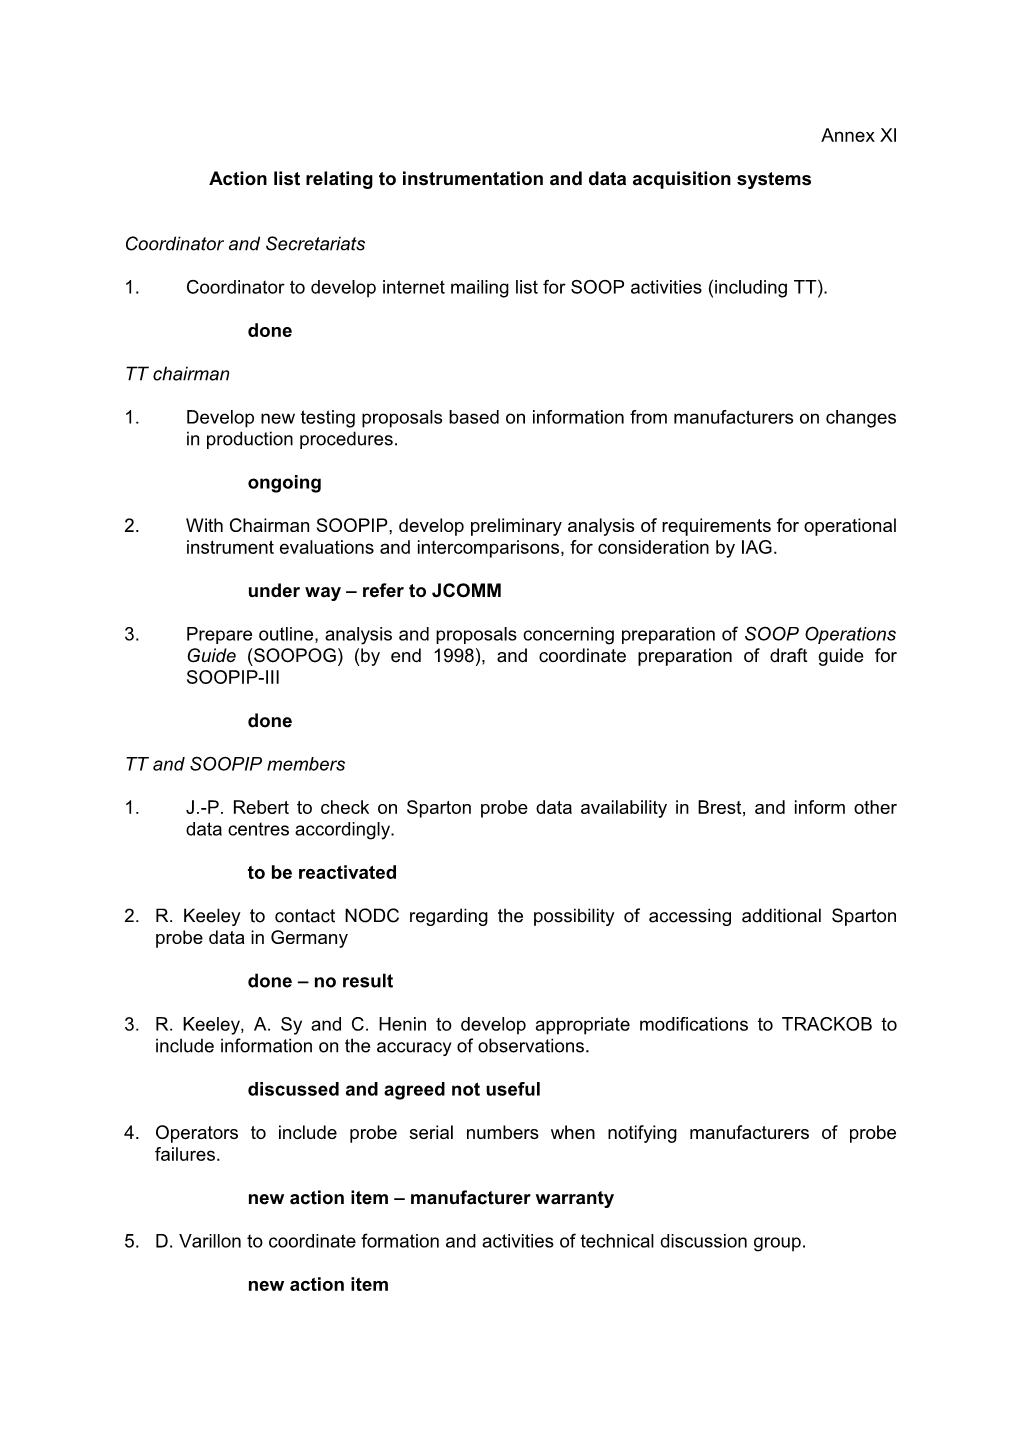 Action List Relating to Instrumentation and Data Acquisition Systems